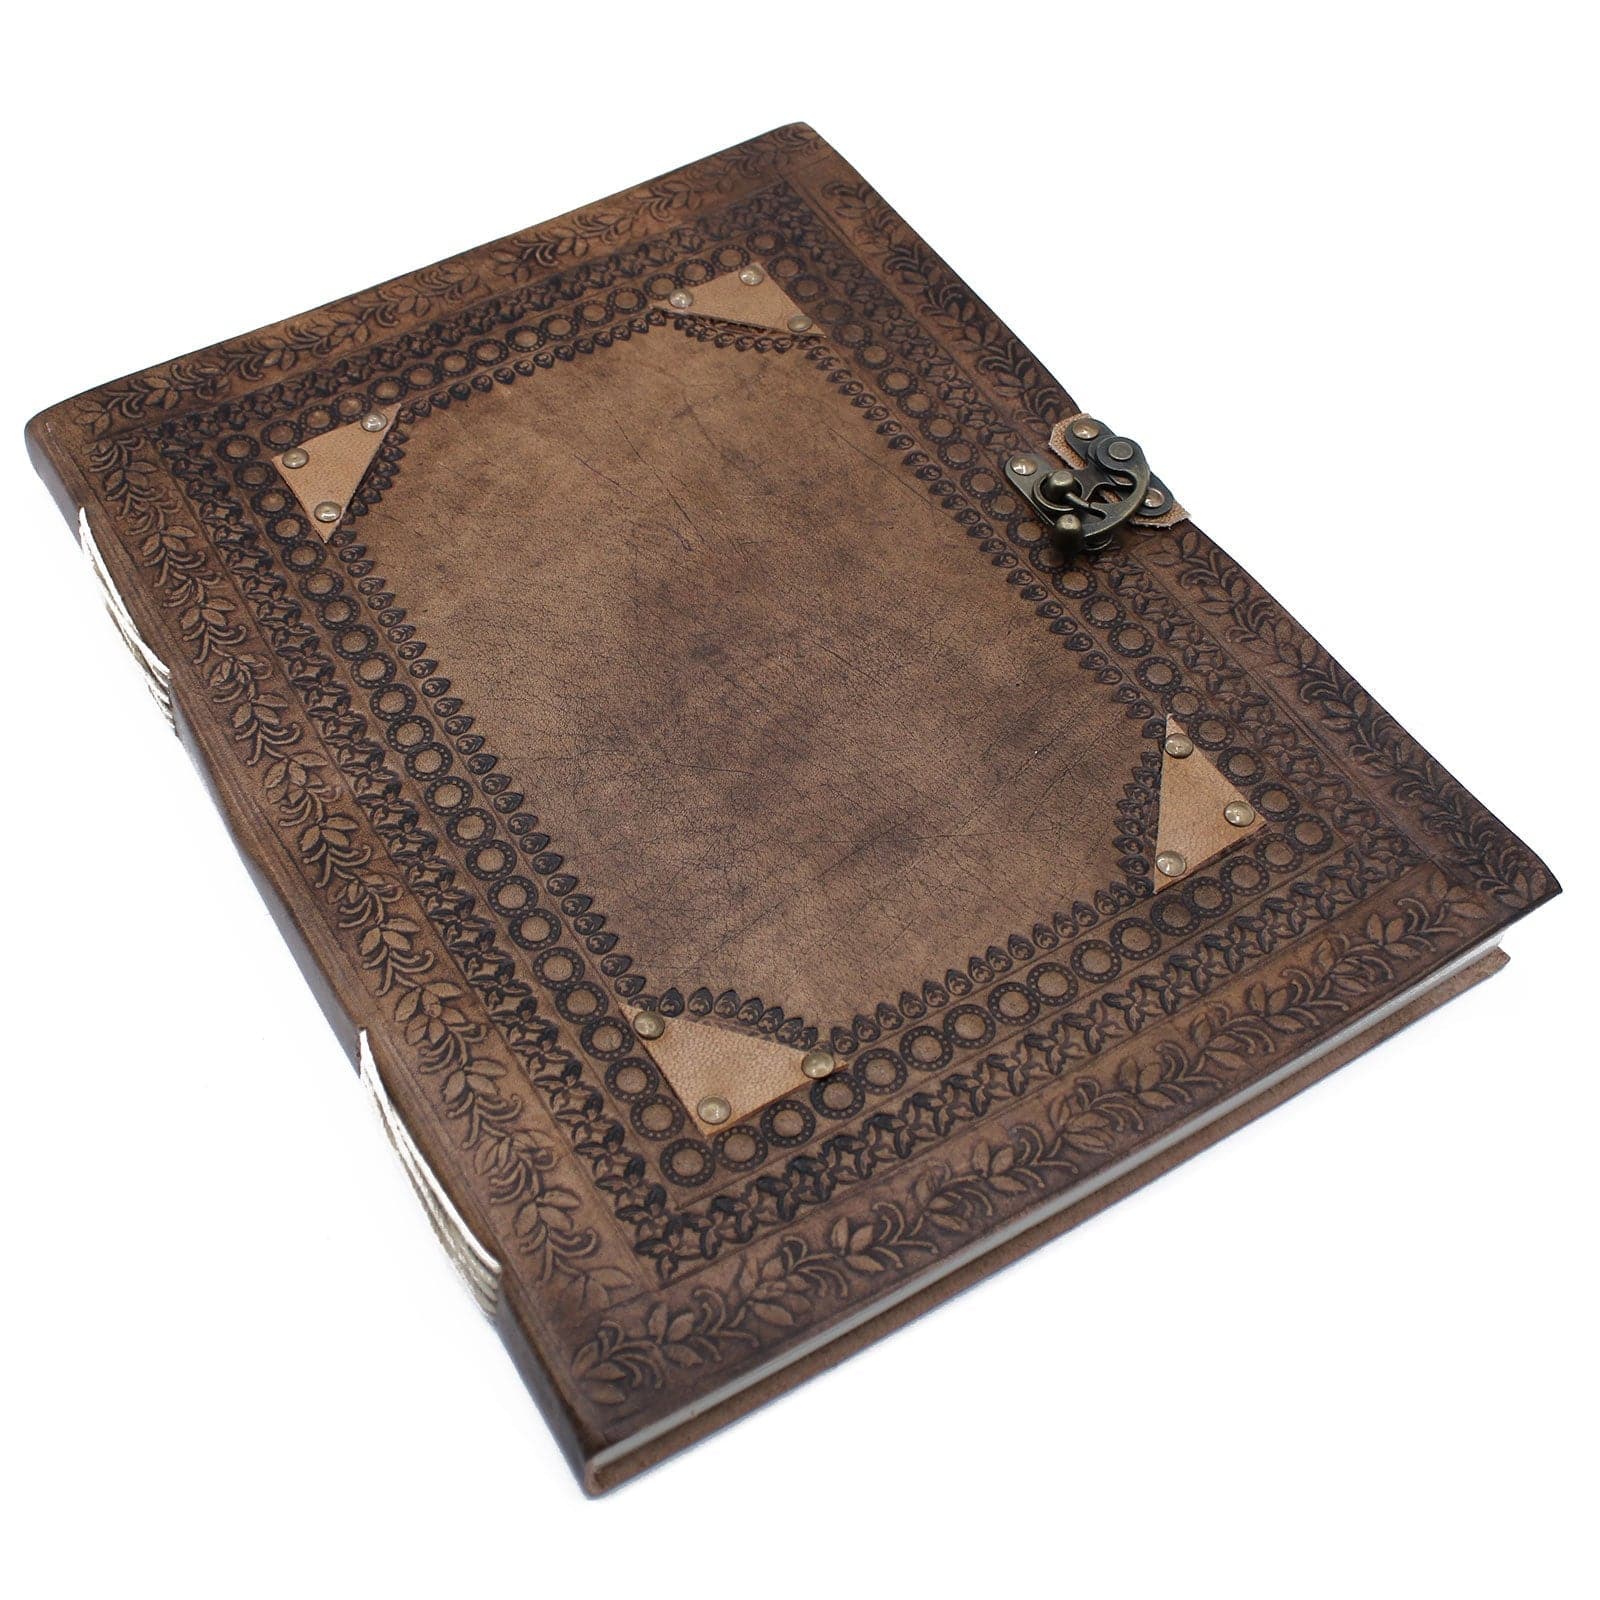 Huge Customisable Visitor Leather Book 10x13 (200 pages) - best price from Maltashopper.com LBN-21